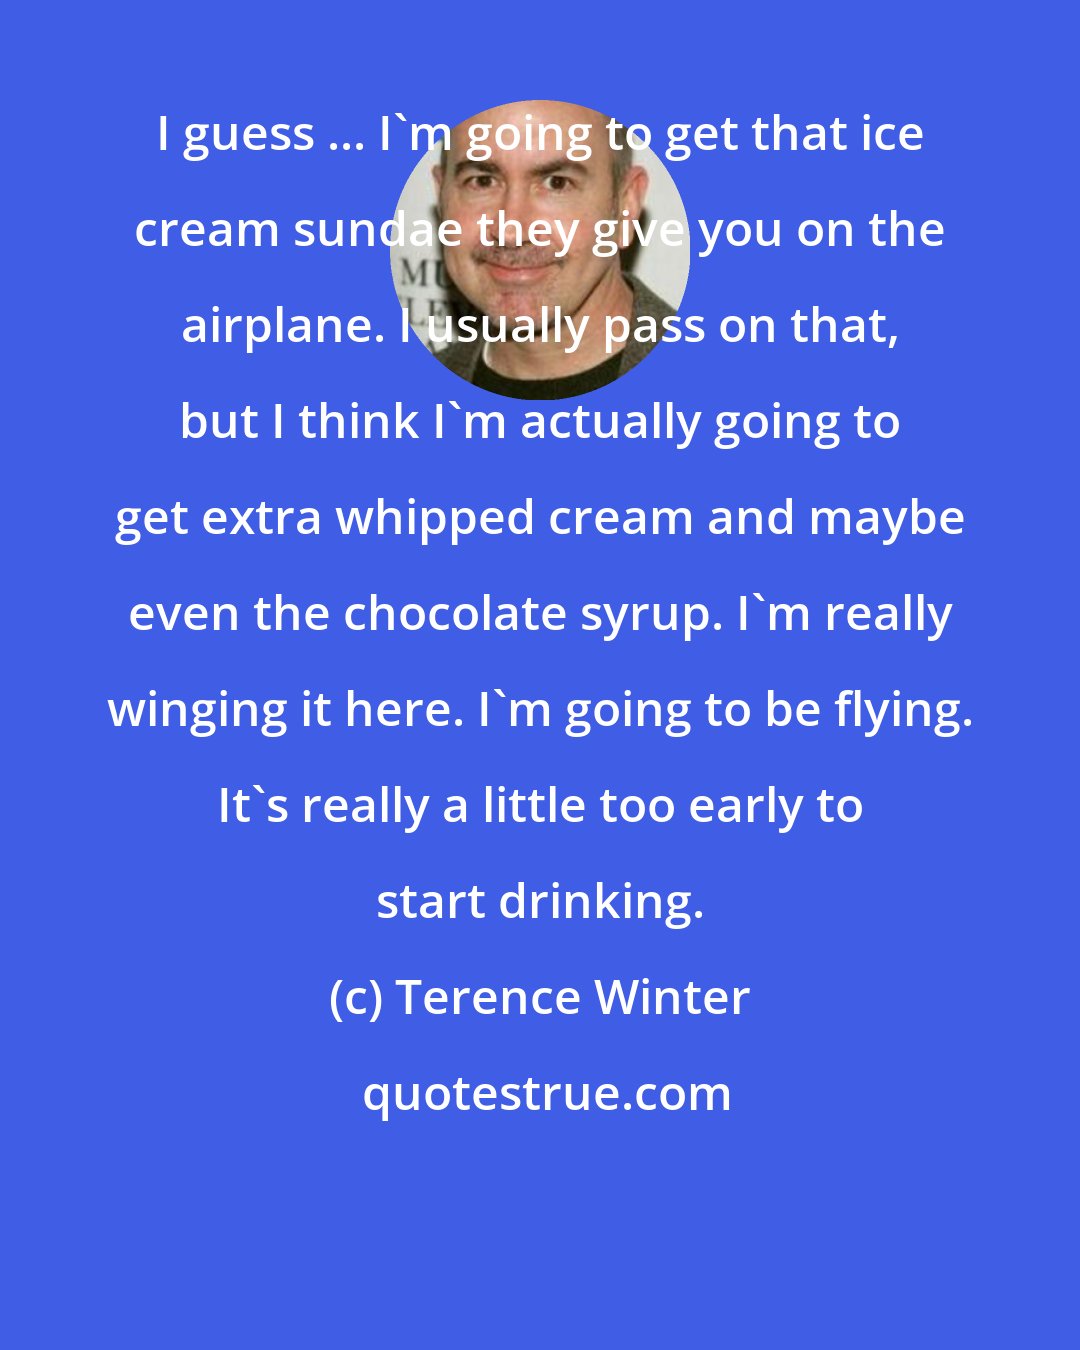 Terence Winter: I guess ... I'm going to get that ice cream sundae they give you on the airplane. I usually pass on that, but I think I'm actually going to get extra whipped cream and maybe even the chocolate syrup. I'm really winging it here. I'm going to be flying. It's really a little too early to start drinking.